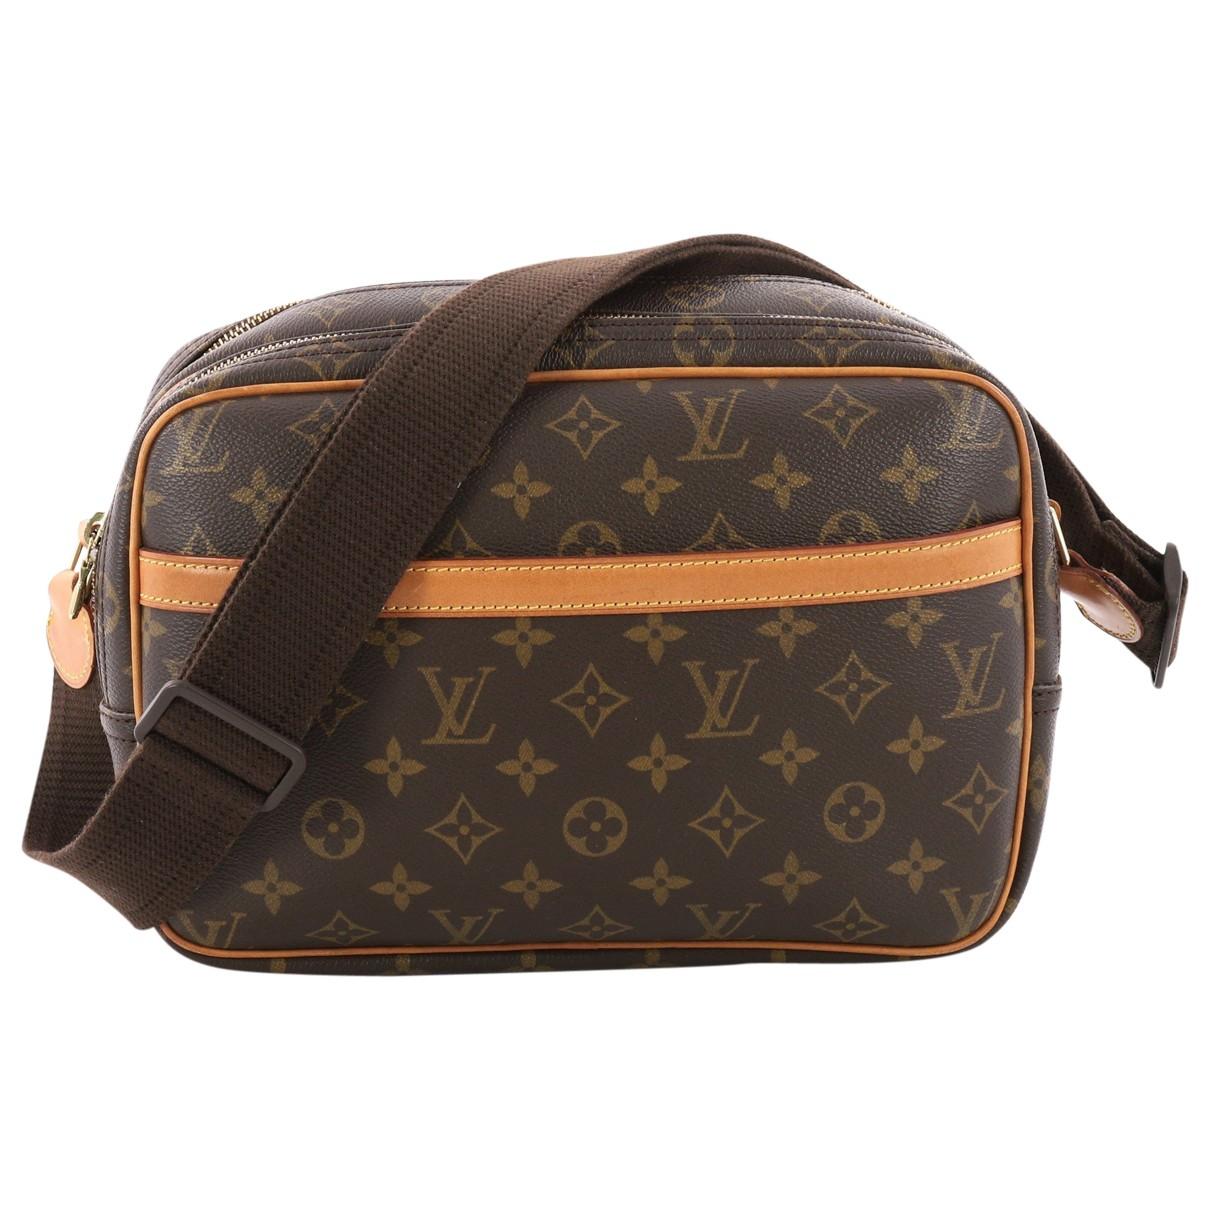 Louis Vuitton Canvas Reporter Cloth Crossbody Bag in Brown - Lyst